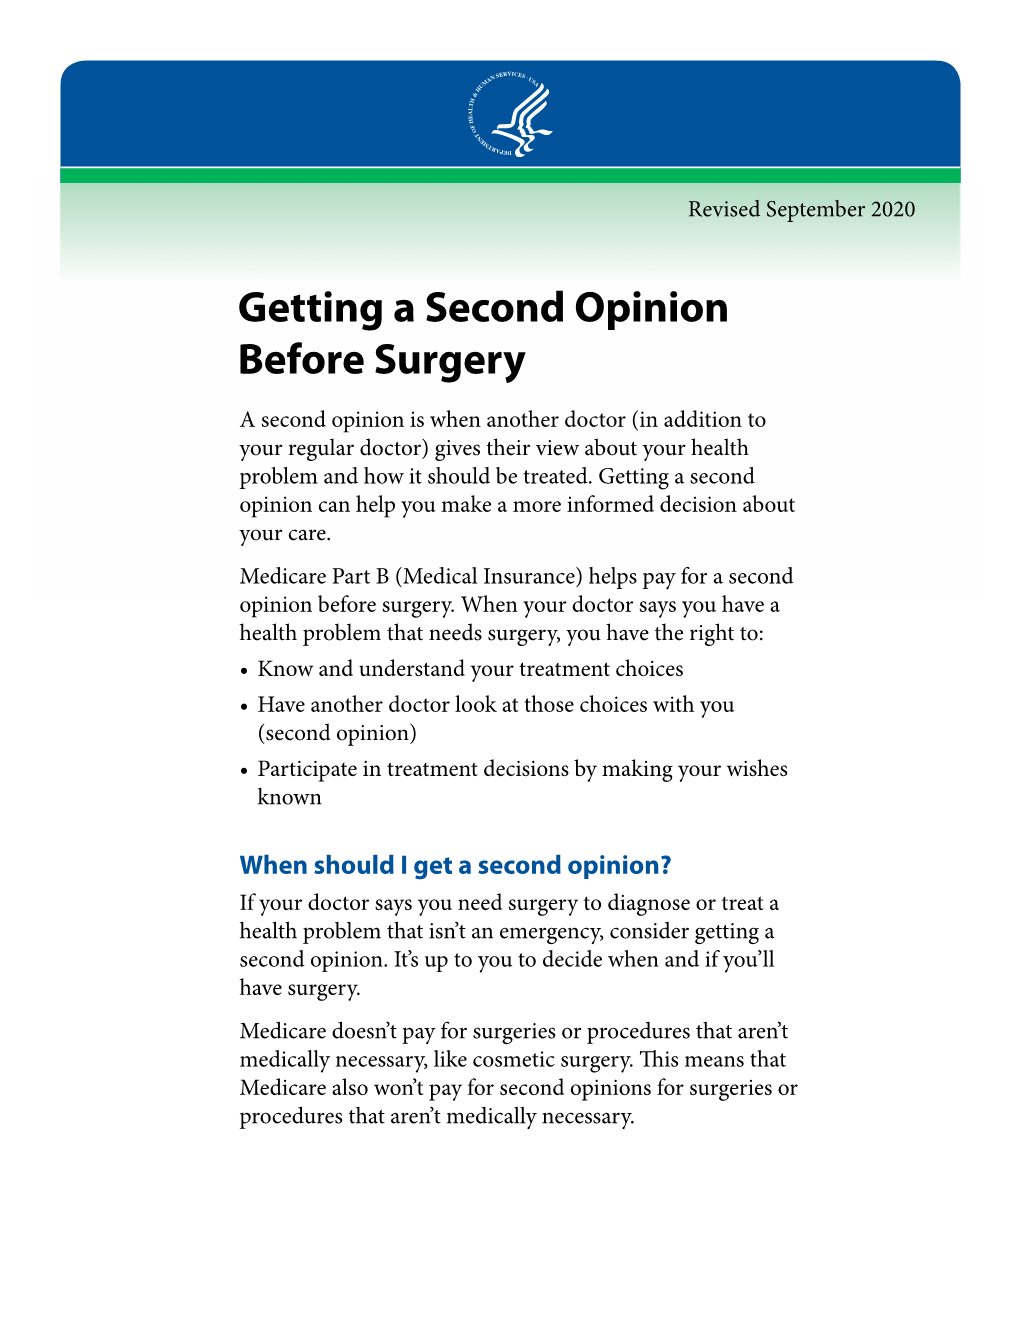 Getting a Second Opinion Before Surgery